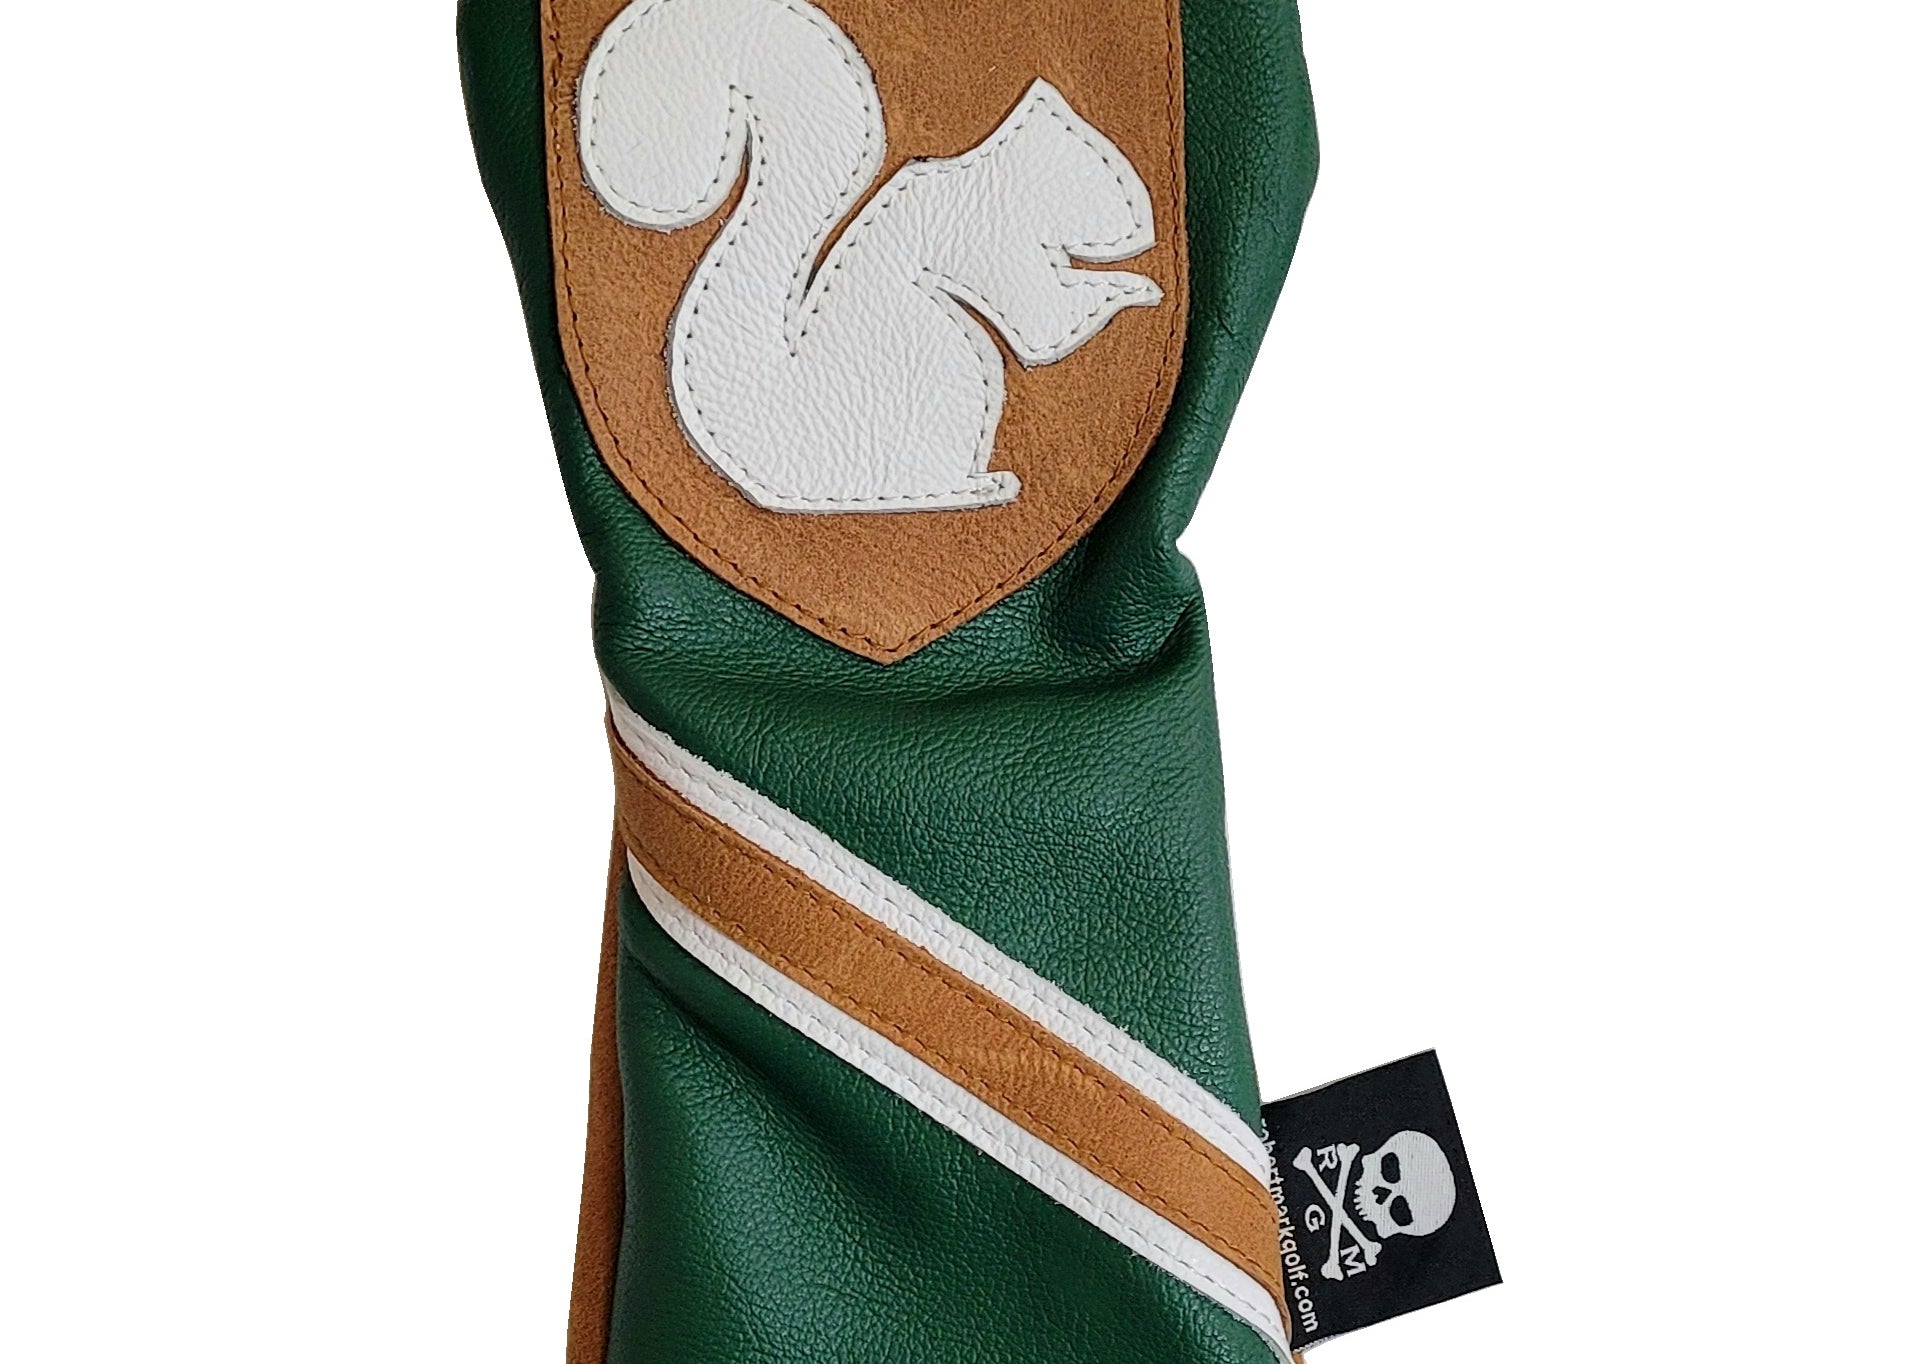 One-Of-A-Kind! The "Get A Nut!" Fairway Wood or Driver Headcover - Robert Mark Golf